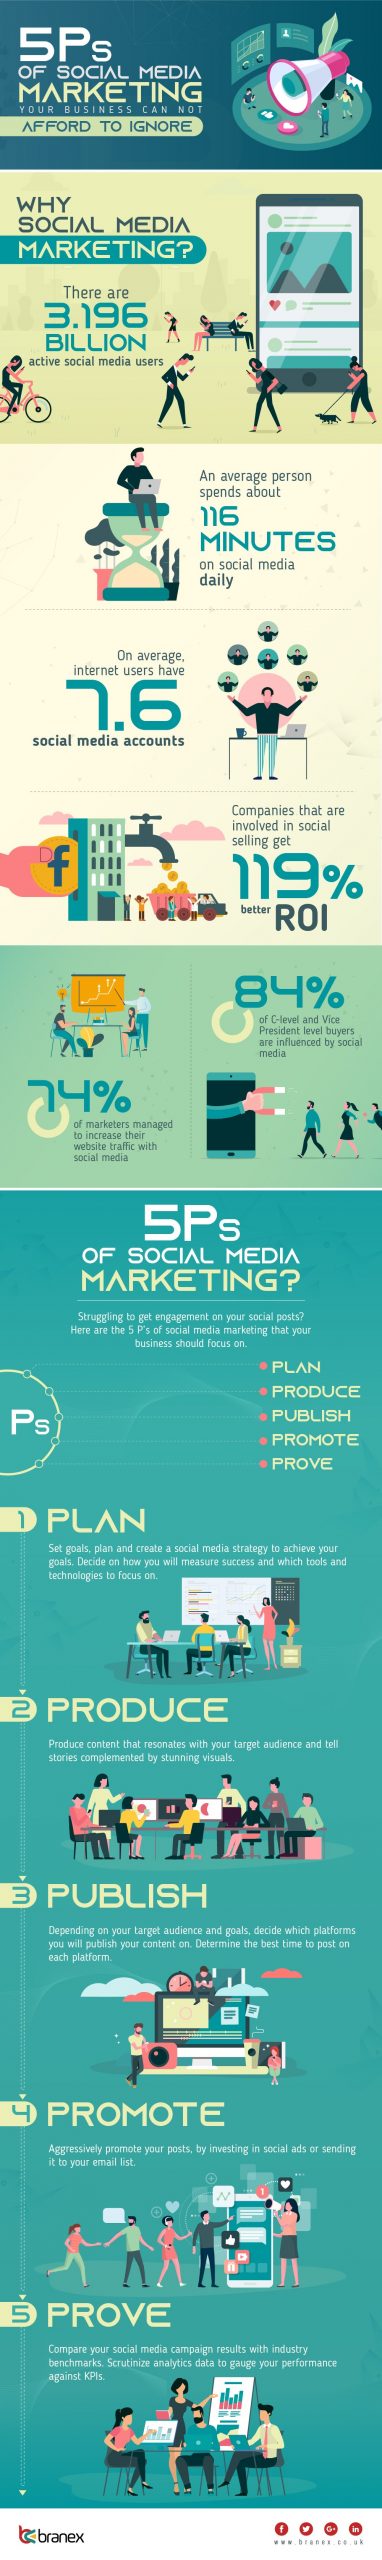 , The 5 P&#8217;s of Social Media Marketing [Infographic], TornCRM